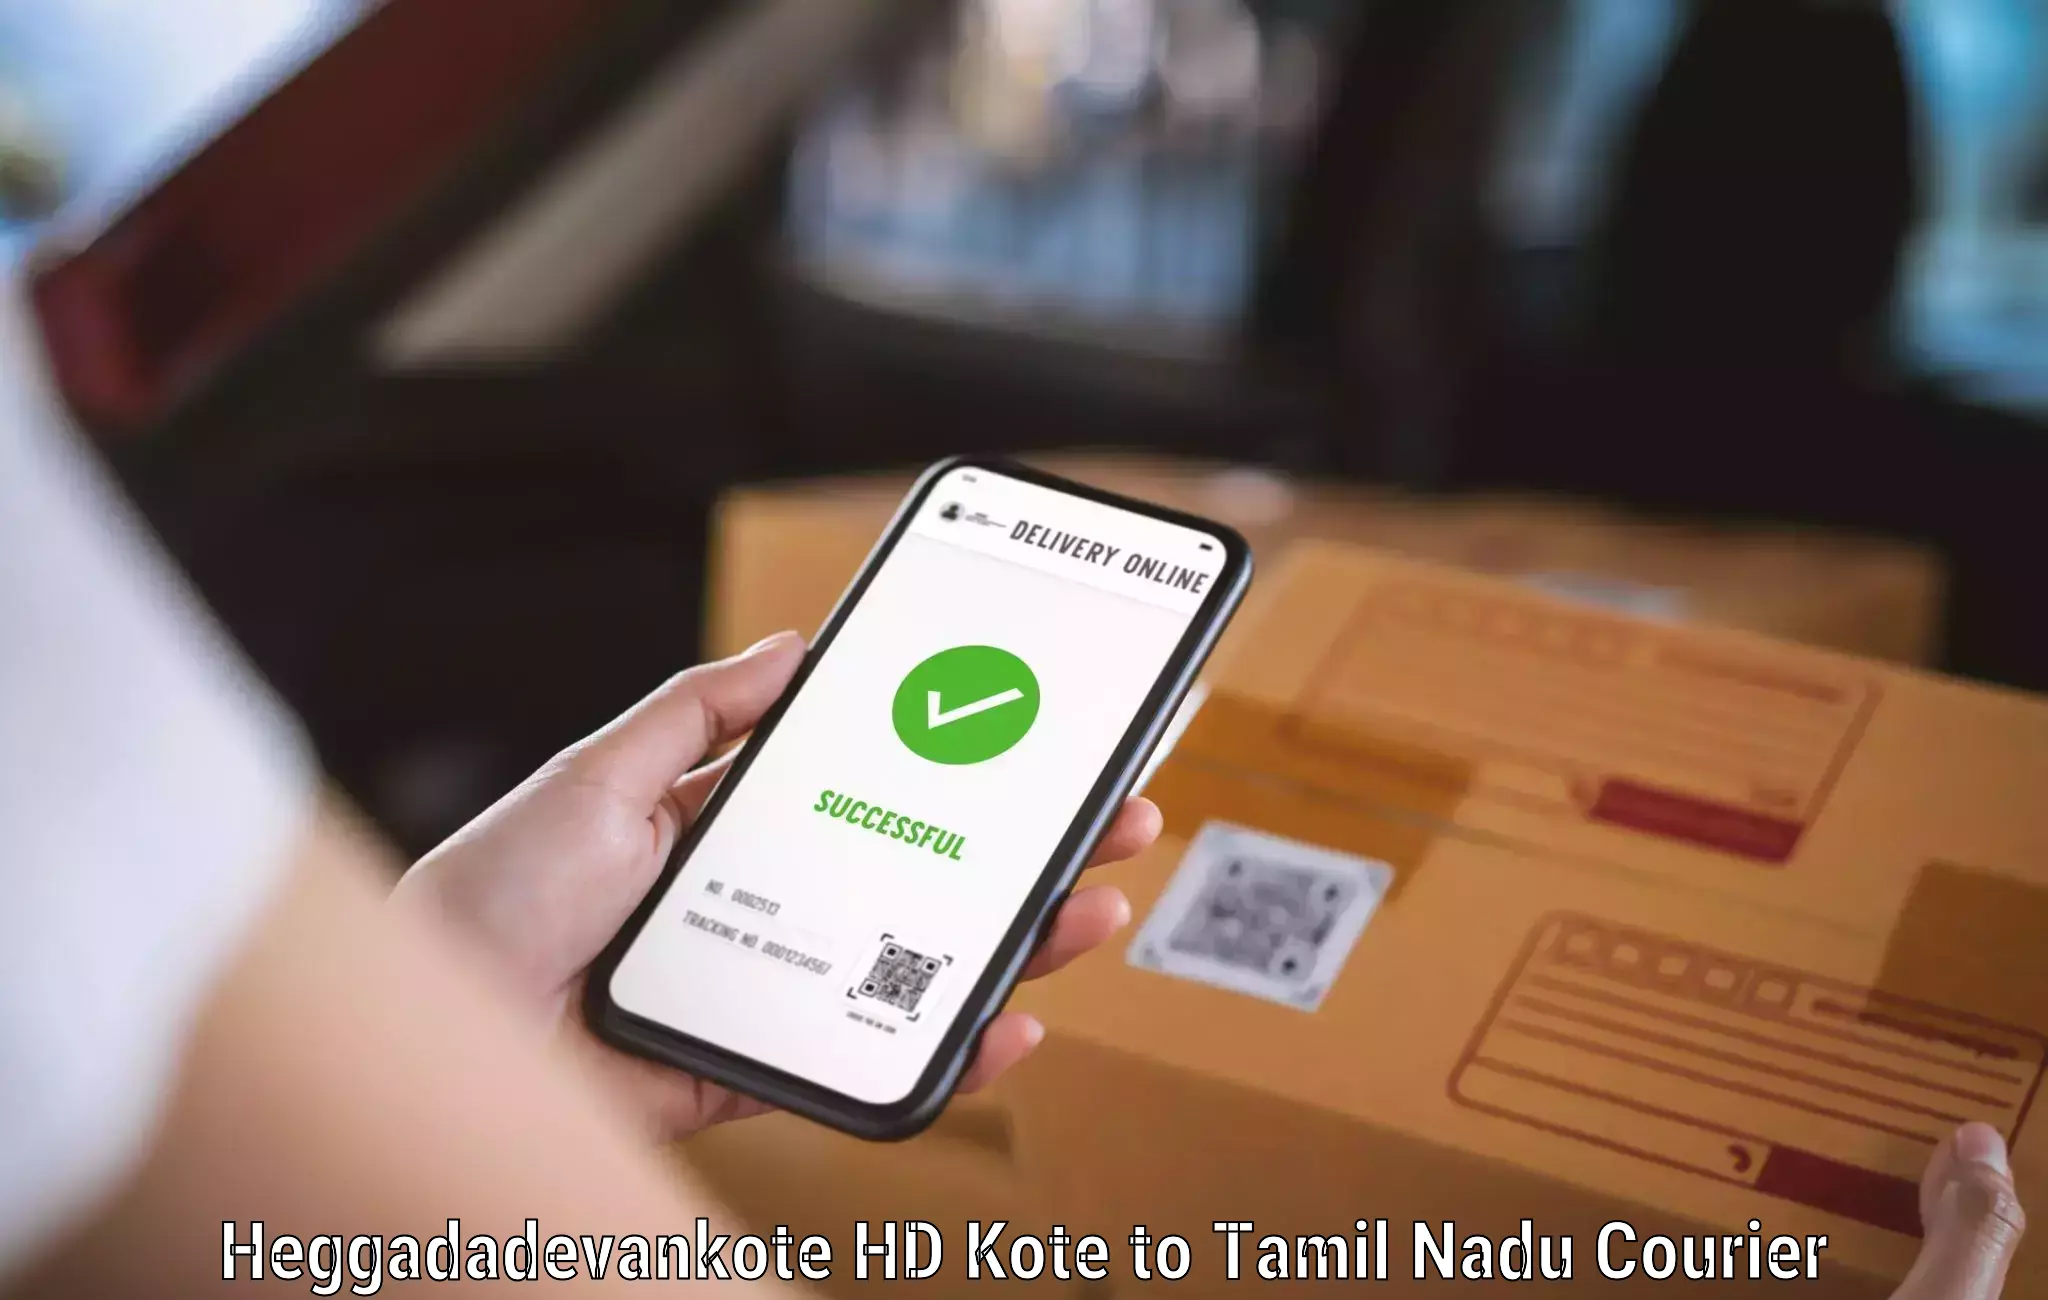 State-of-the-art courier technology Heggadadevankote HD Kote to Sholinghur